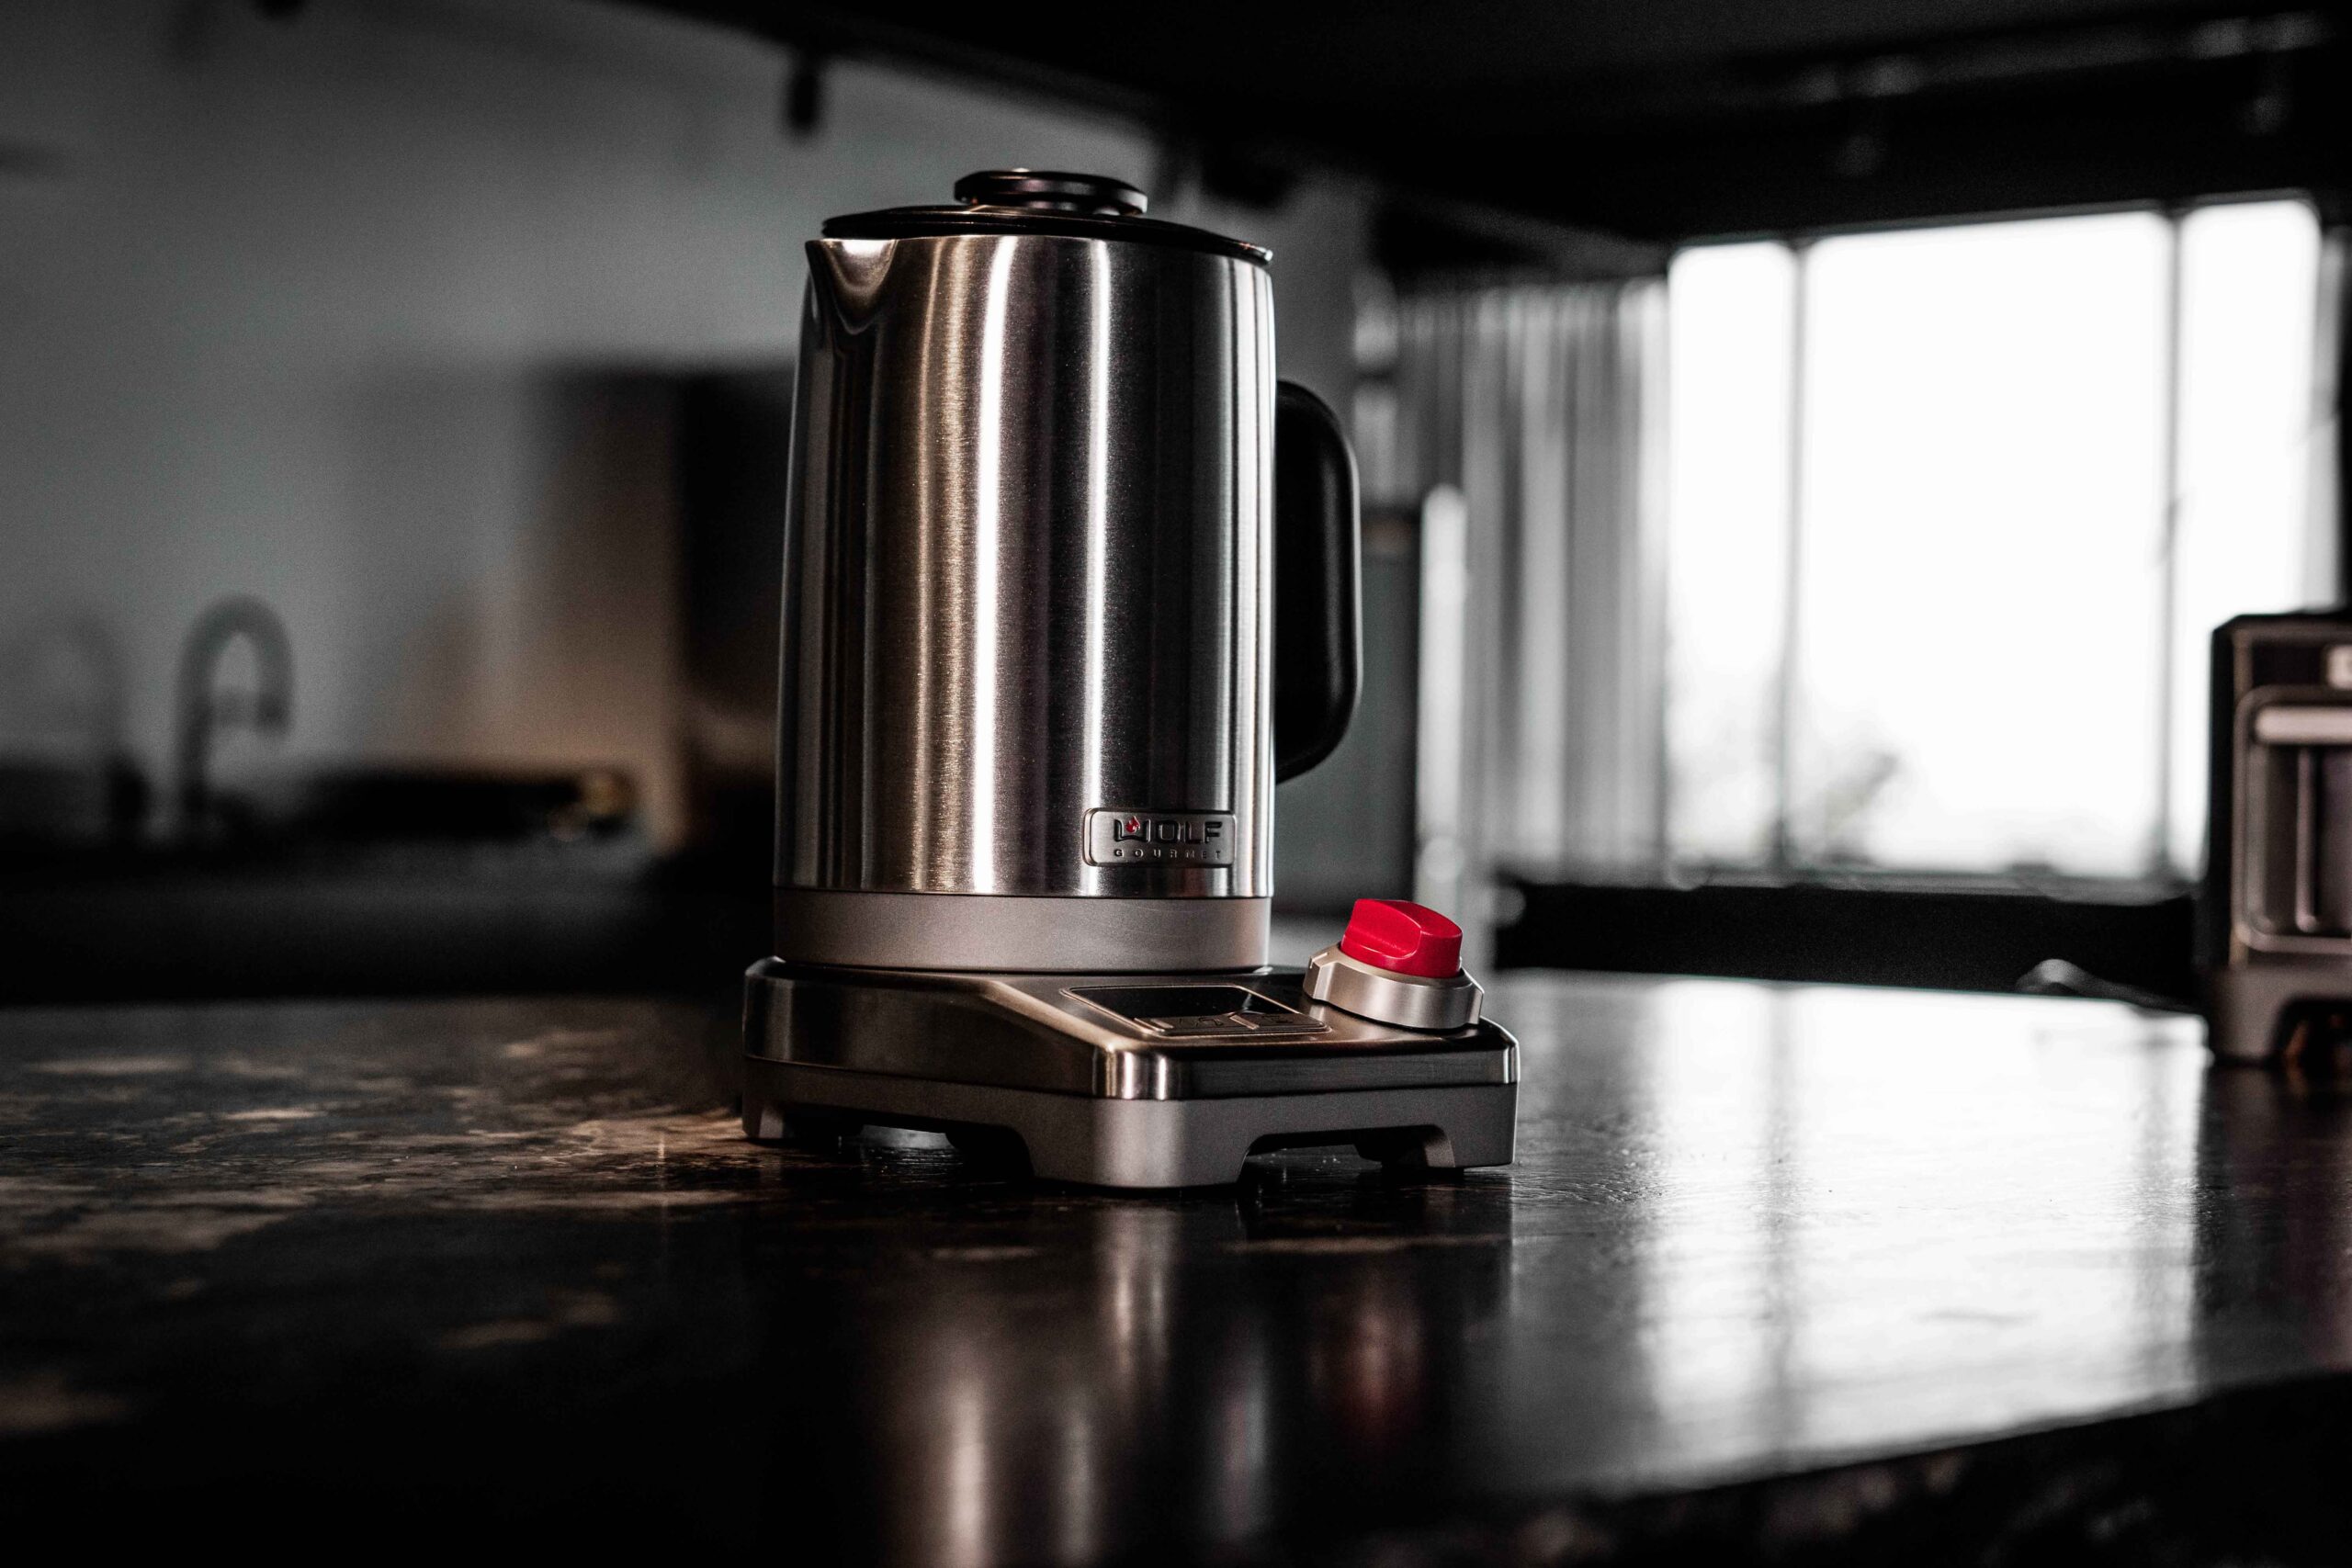 Wolf Gourmet Electric Kettle